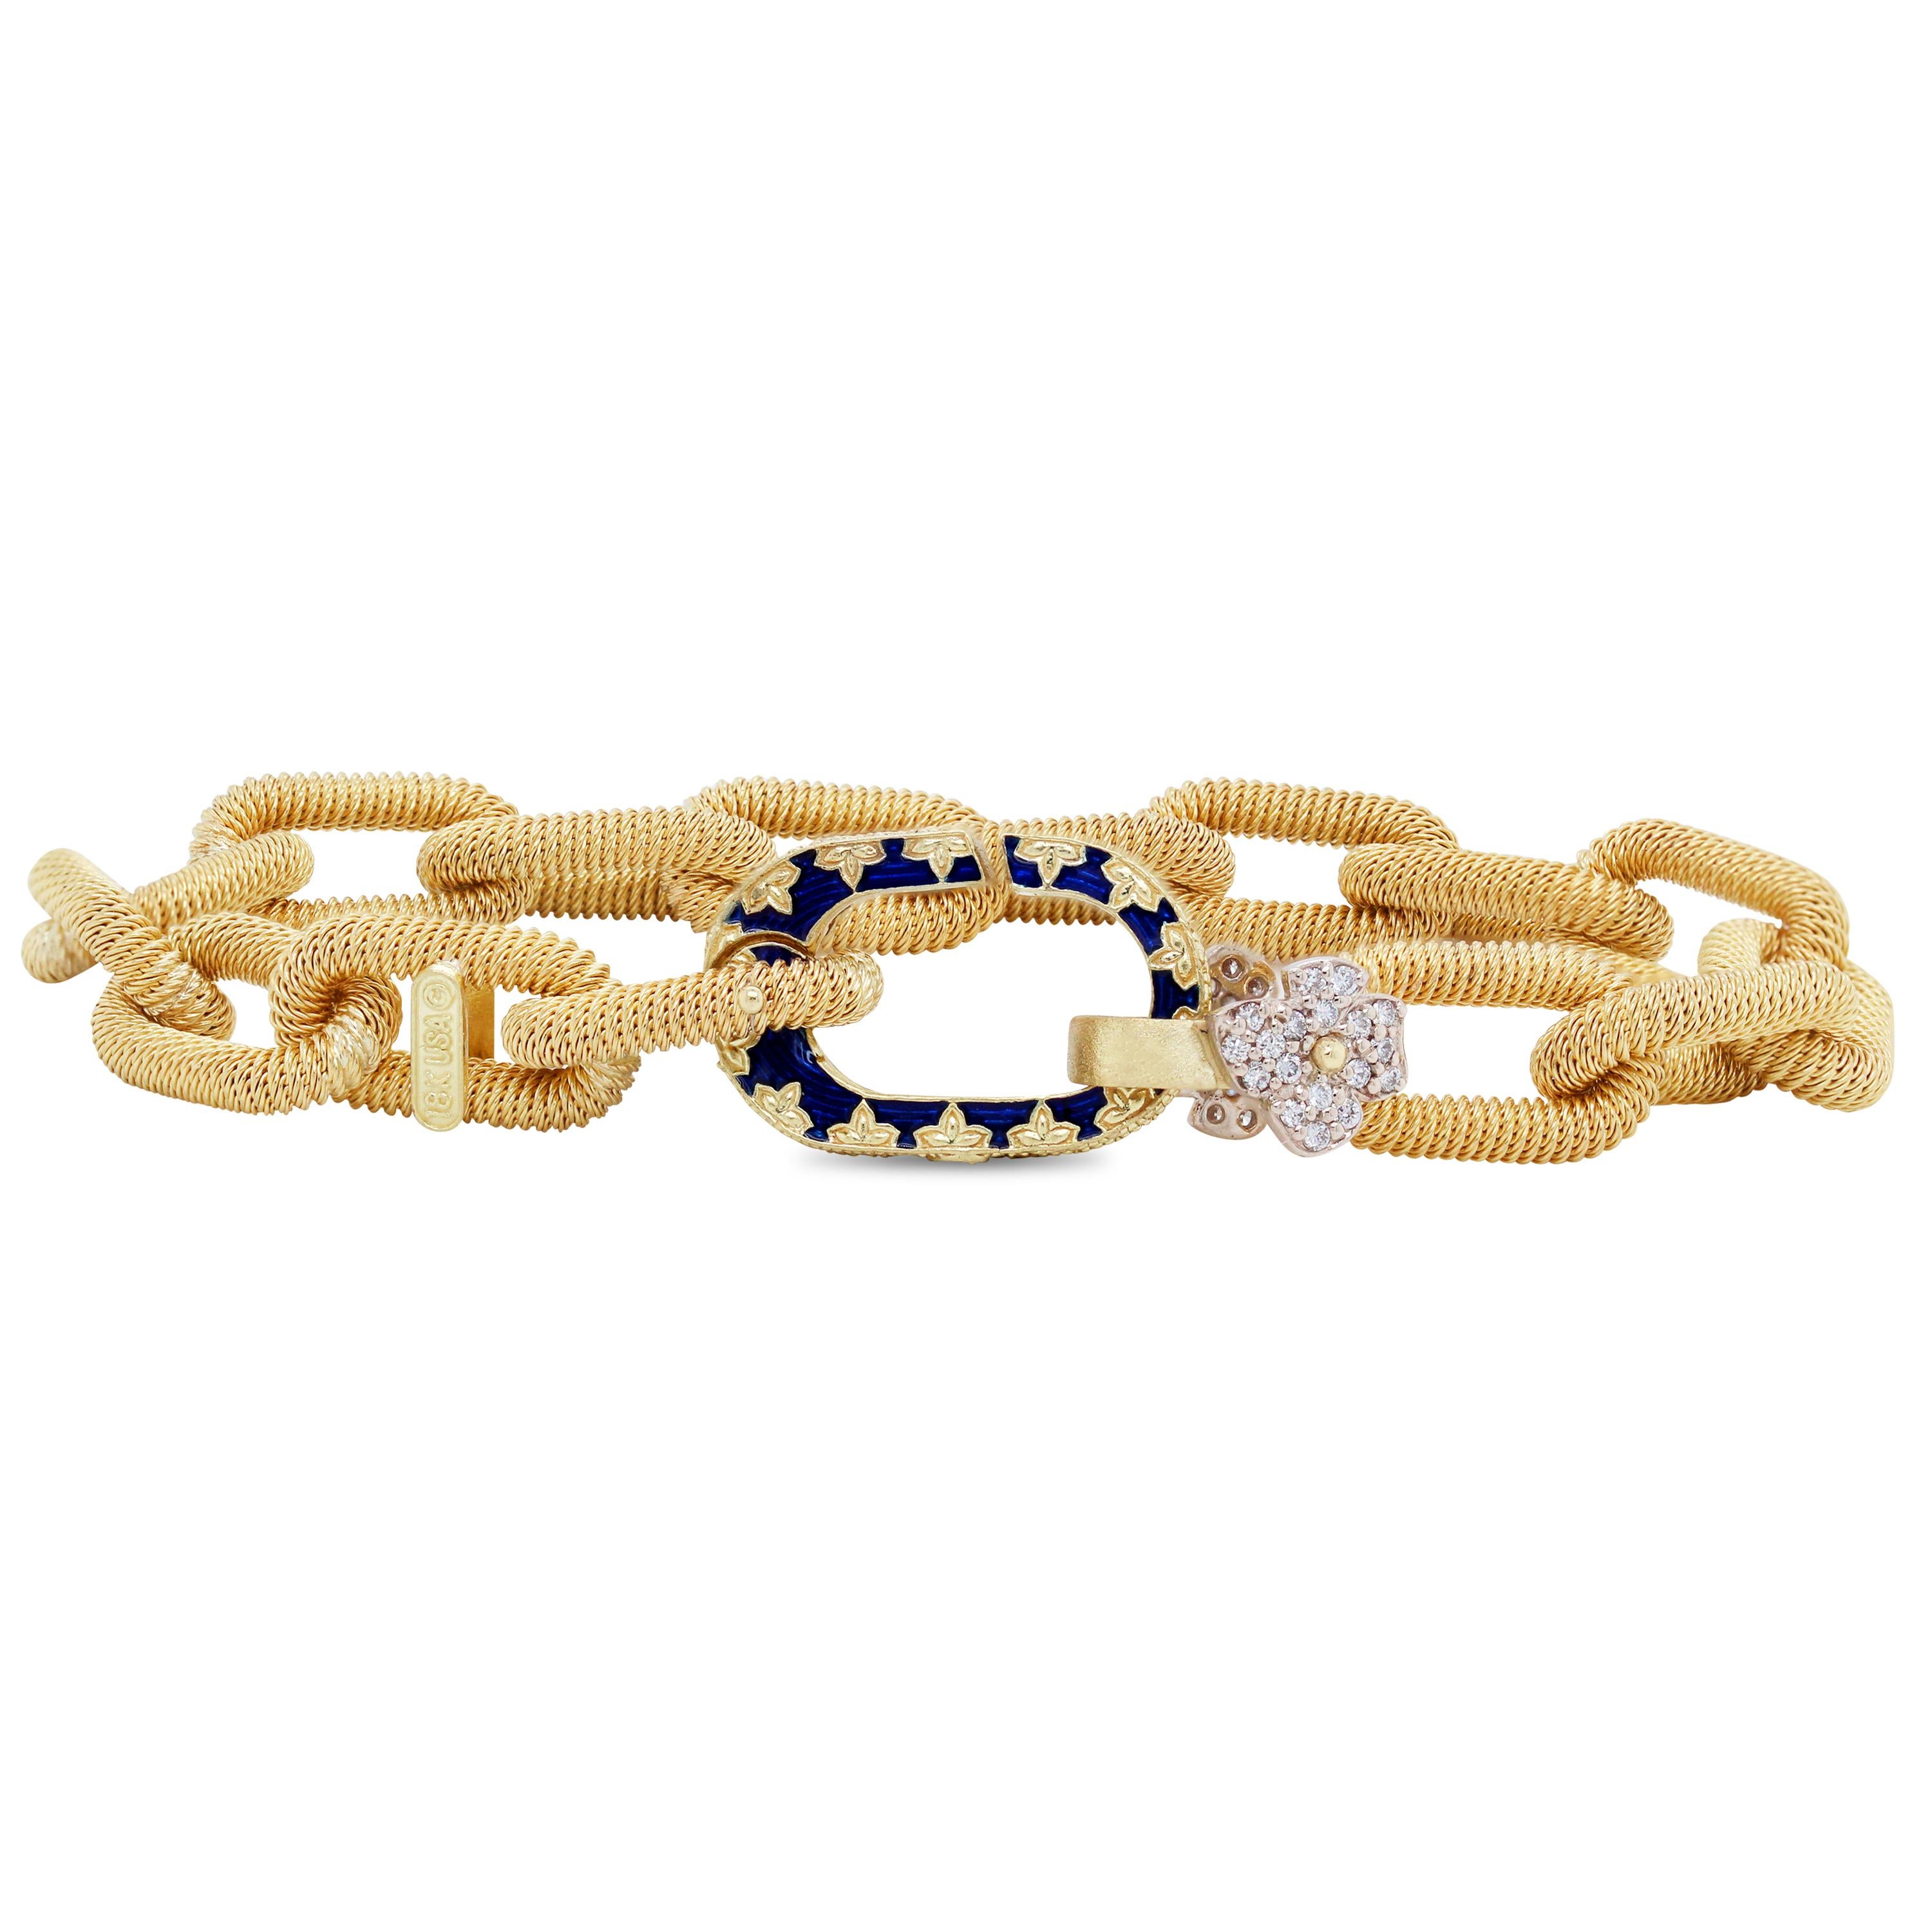 Stambolian 18K Yellow Gold Links Blue Enamel Diamond Flower Bracelet

This gorgeous bracelet by Stambolian features beautiful textured, heavy links all leading to a blue enamel clasp with a diamond flower. The bracelet is double-sided, meaning, the